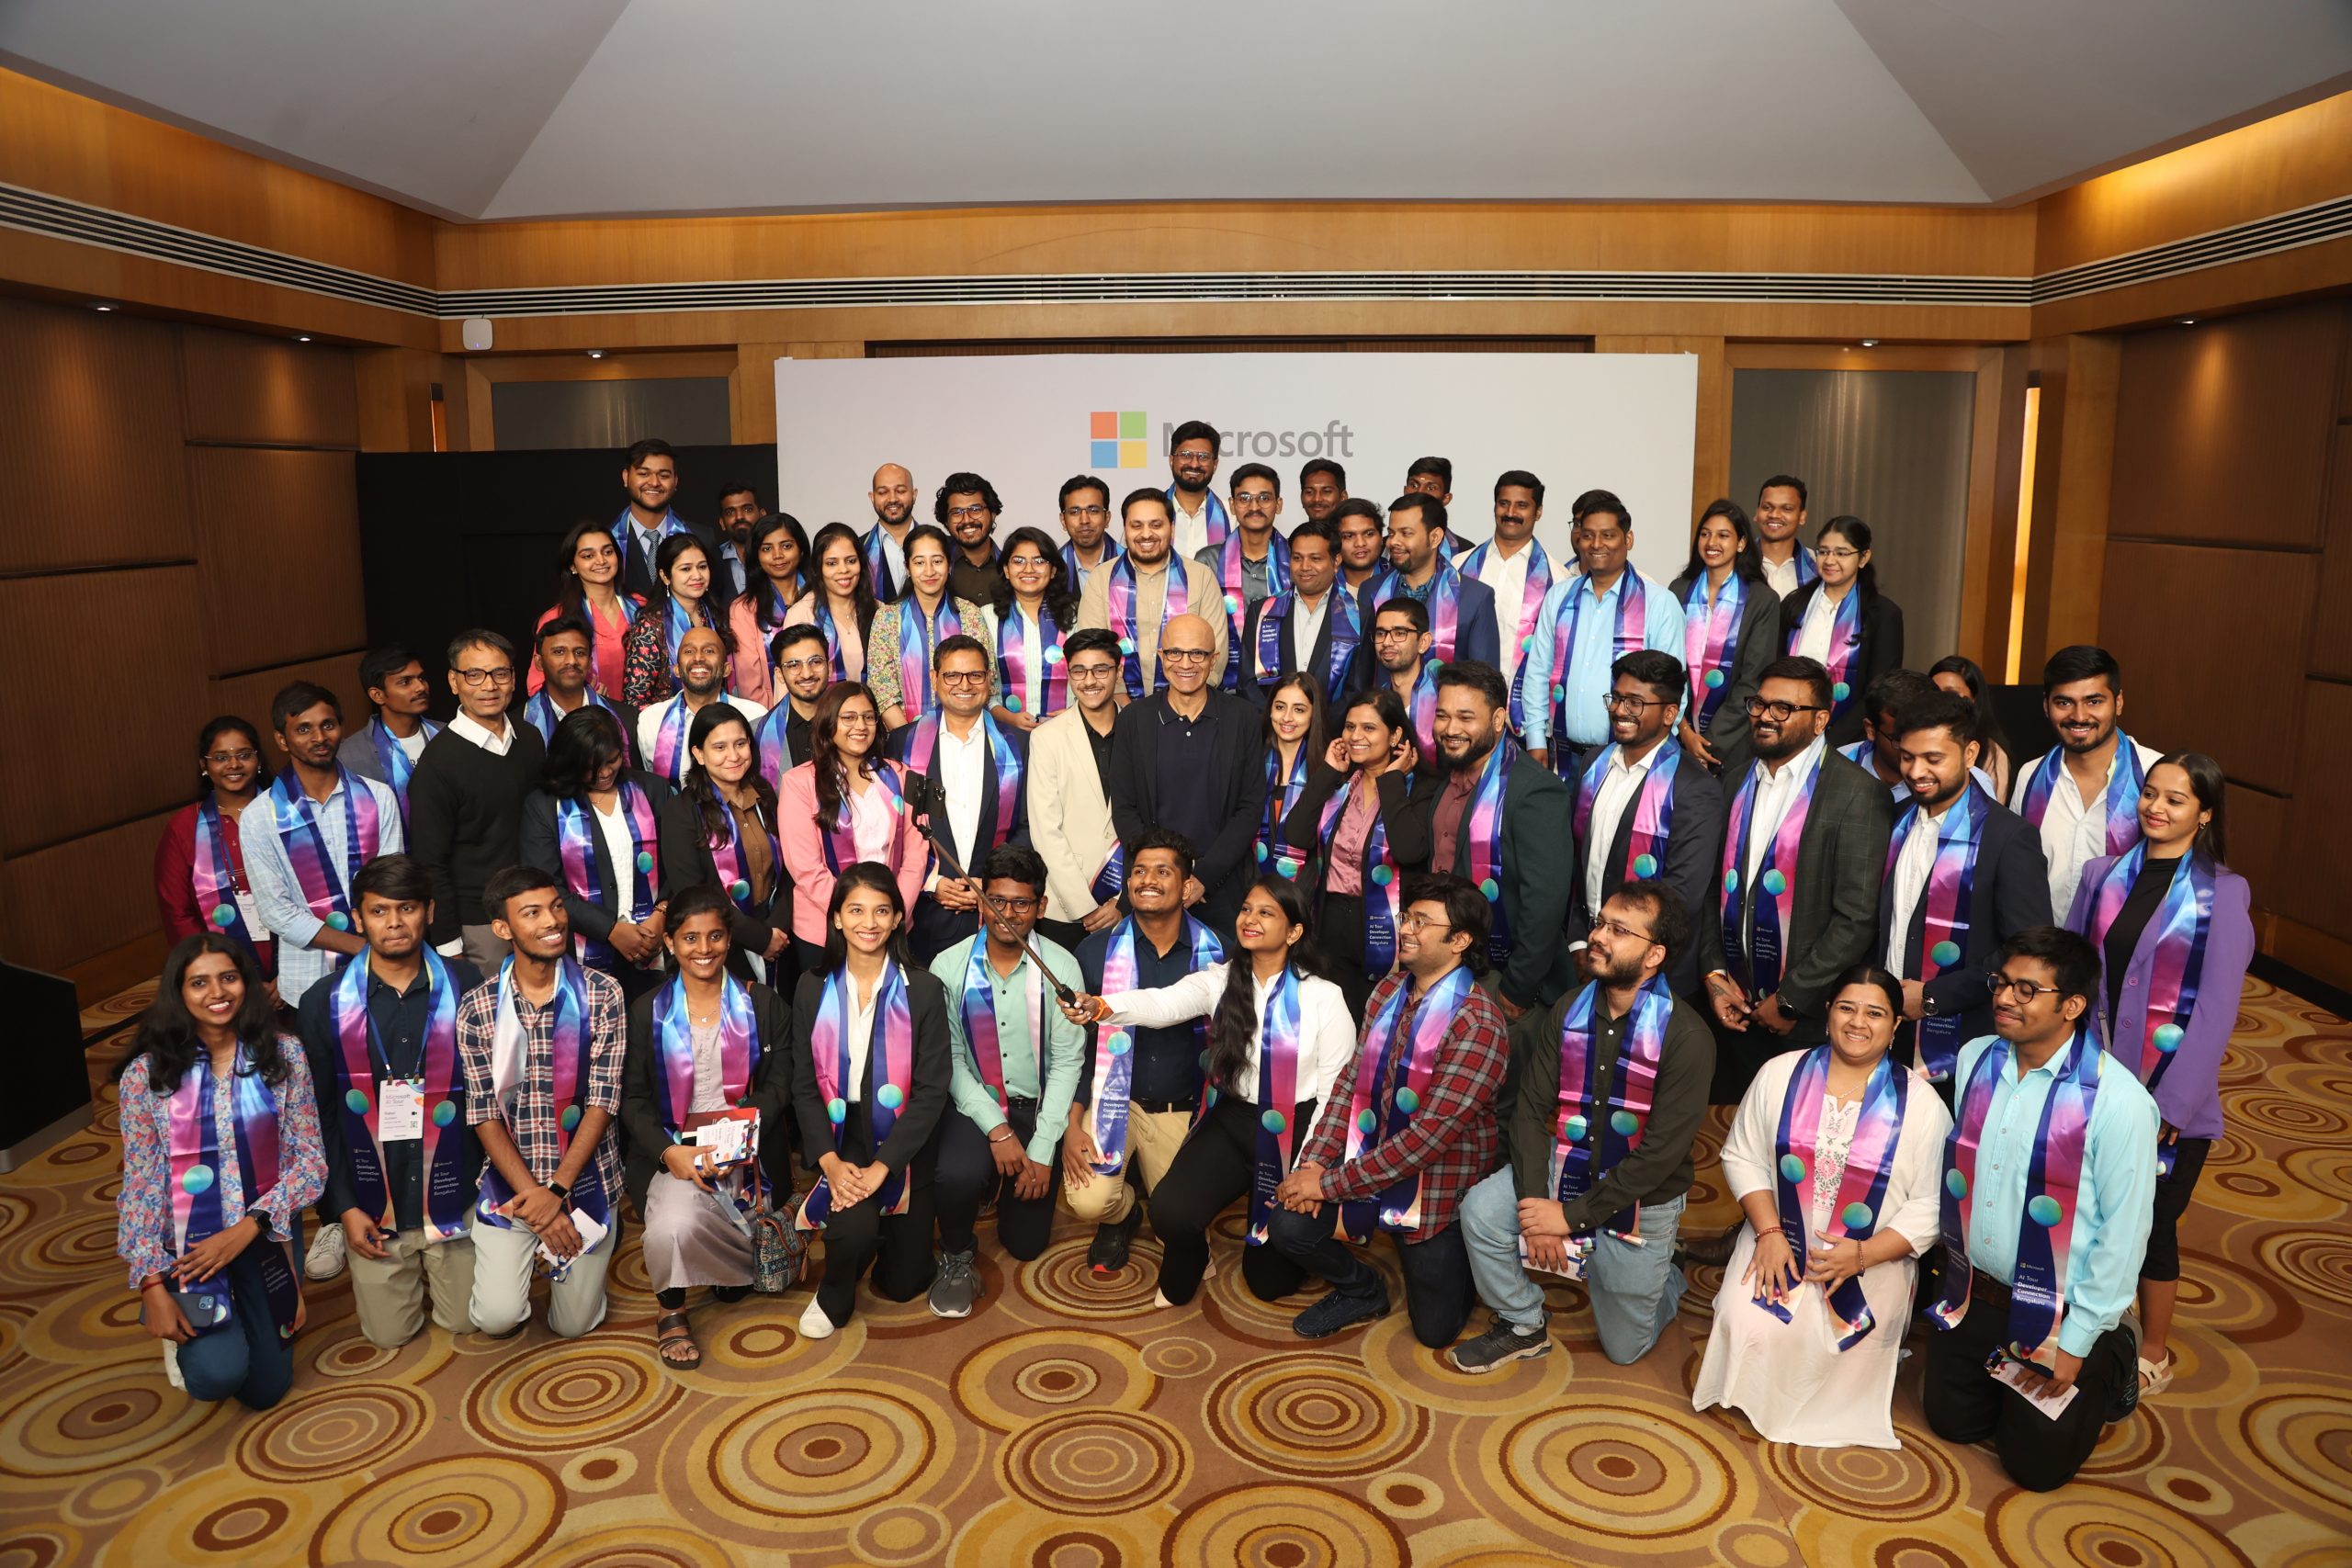 Large group of people posing for a photo with Microsoft chairman and CEO Satya Nadella